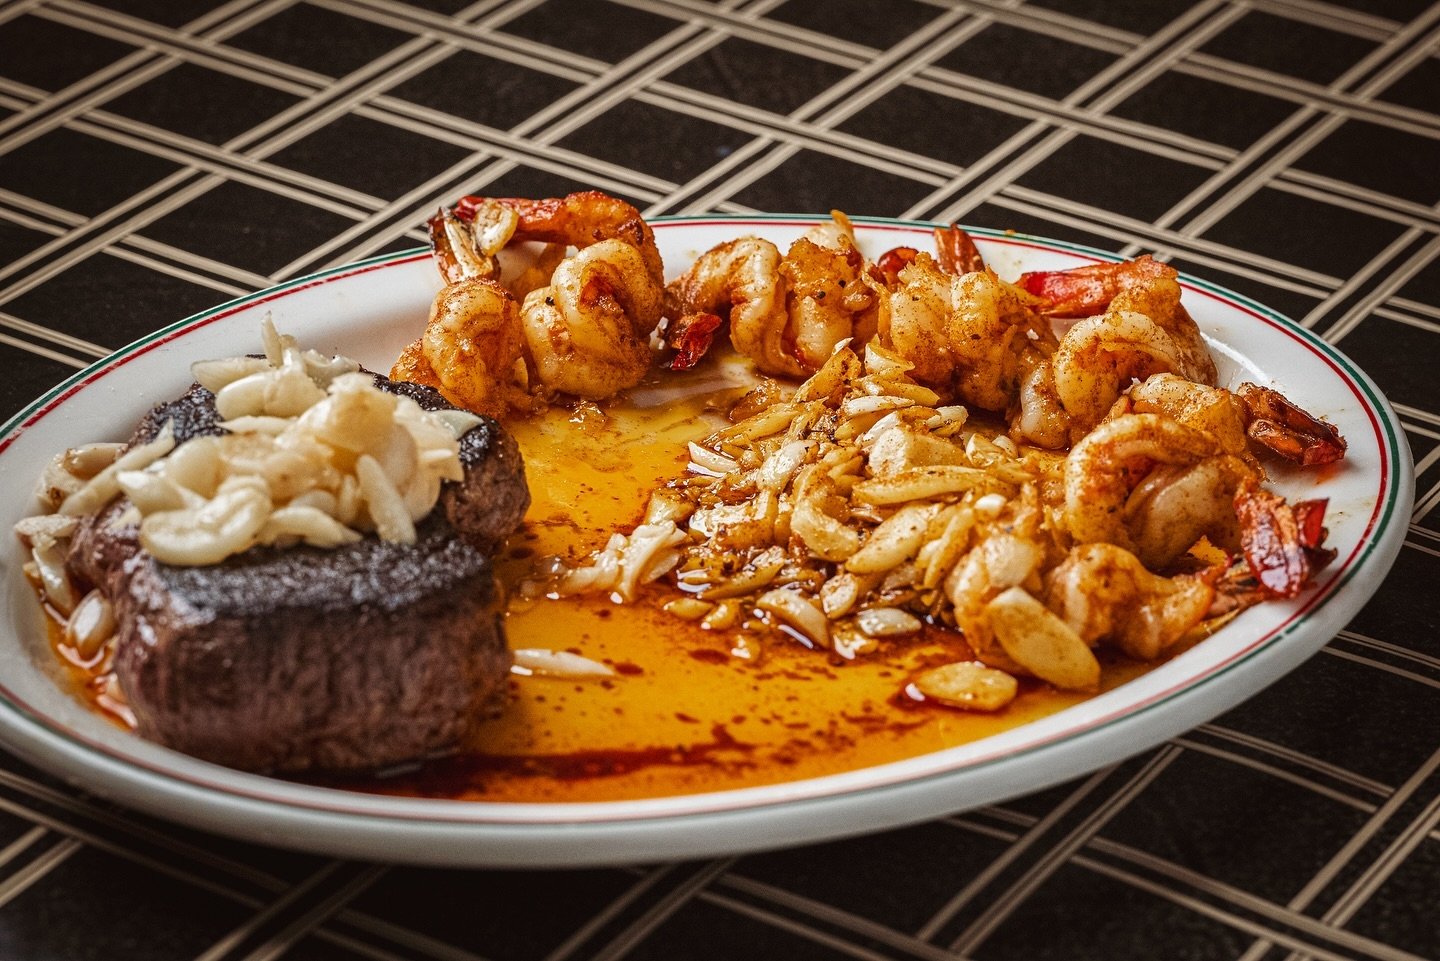 Happy Friday! After a long week, let us take care of the cooking for you. You can&rsquo;t go wrong with this dynamic duo! 🍤🥩

#elkostarhotel #basquefood #familystyledining #steakandshrimp